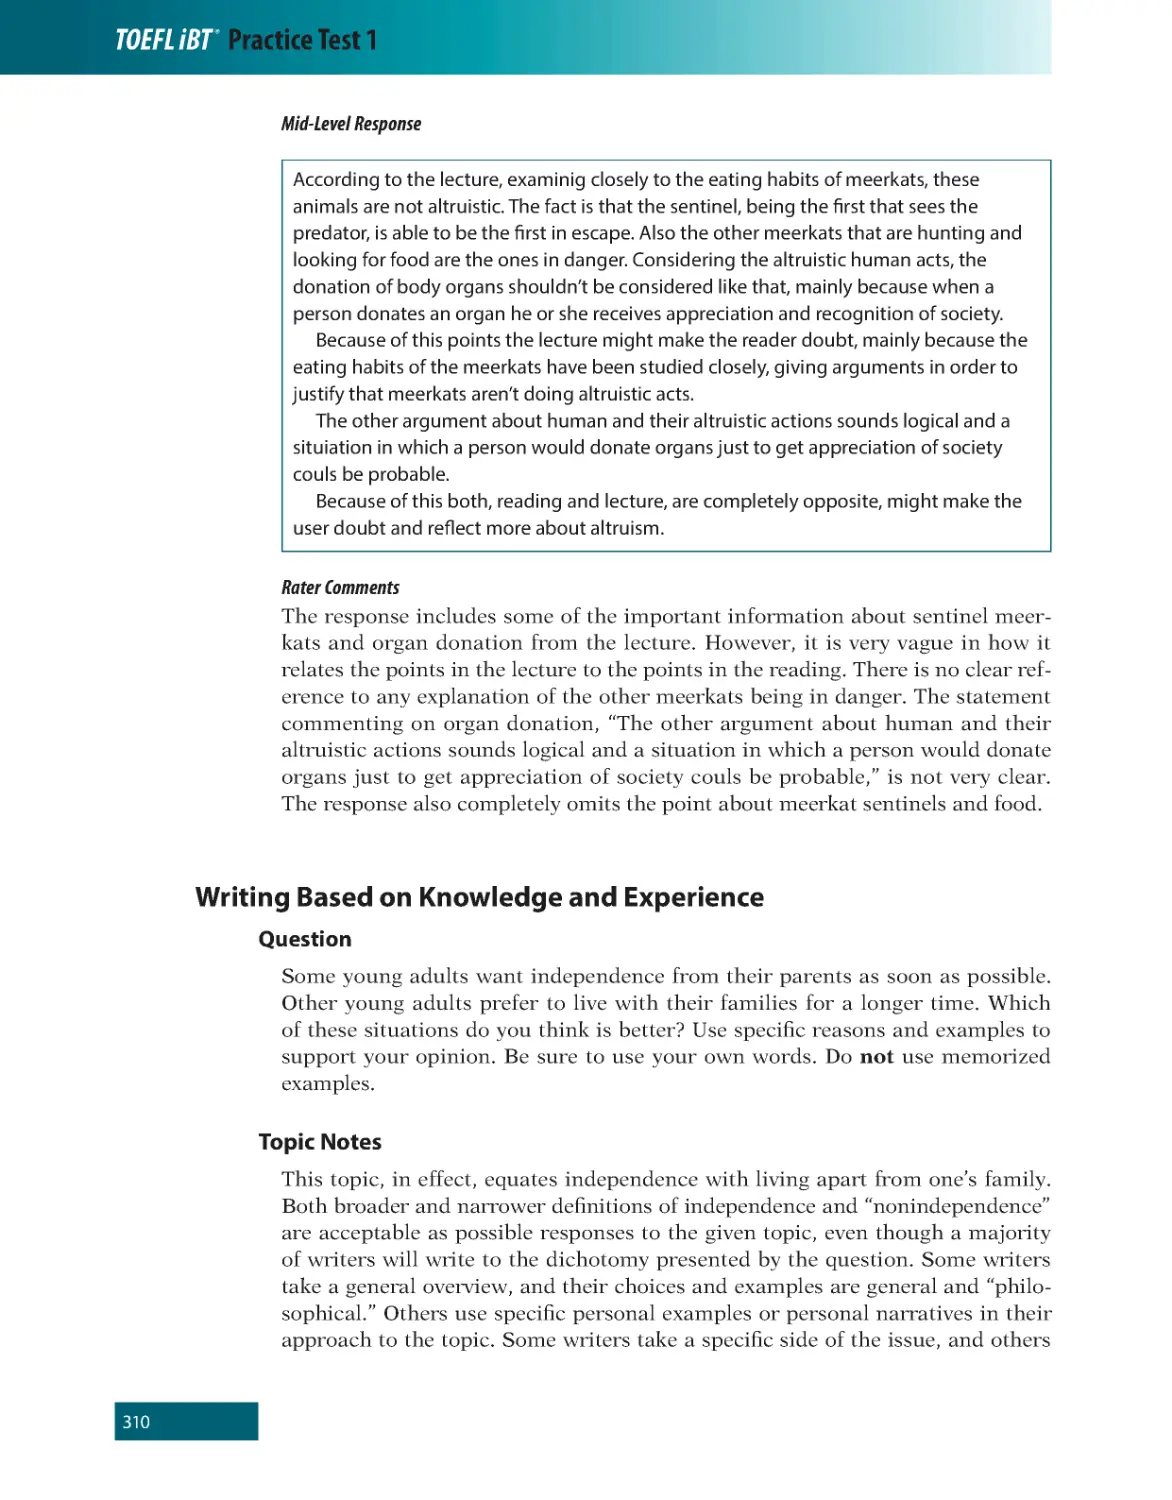 Mid-Level Response
Rater Comments
Writing Based on Knowledge and Experience
Topic Notes